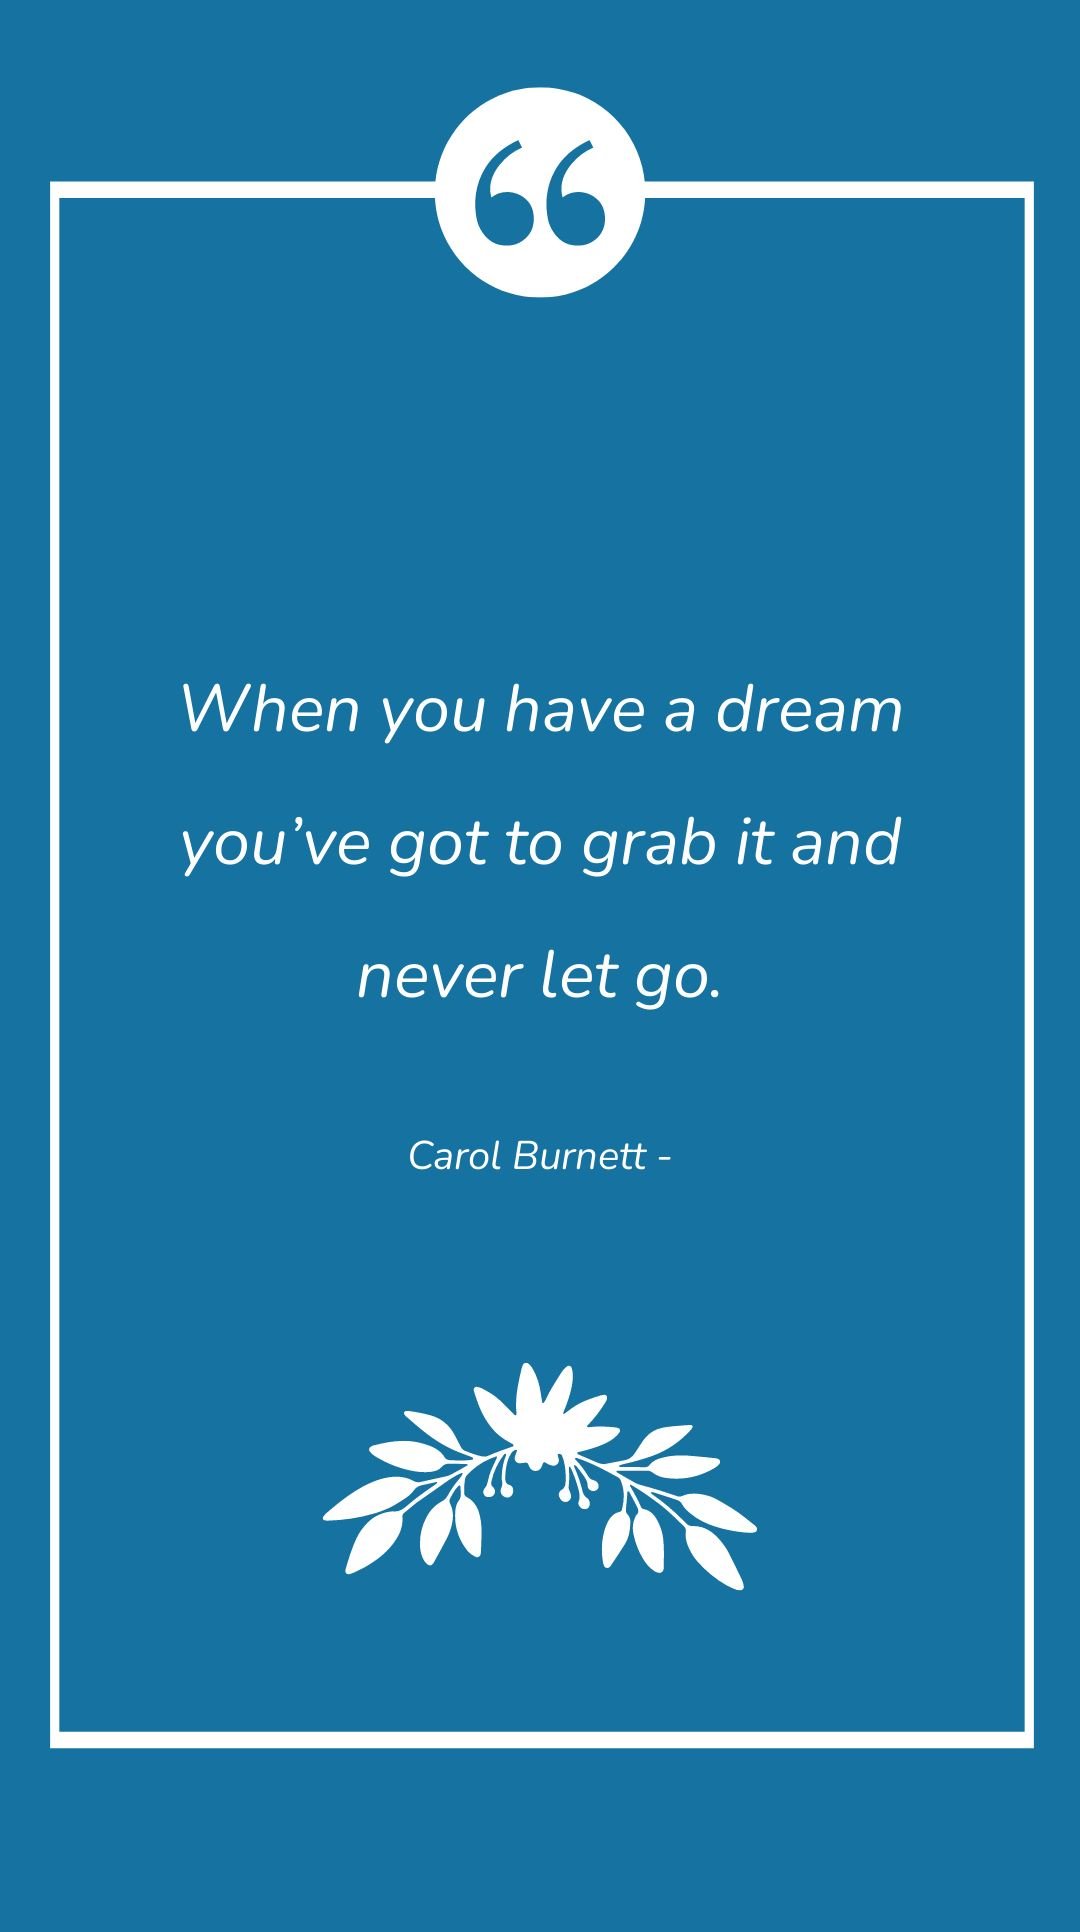 Carol Burnett - When you have a dream you’ve got to grab it and never let go.